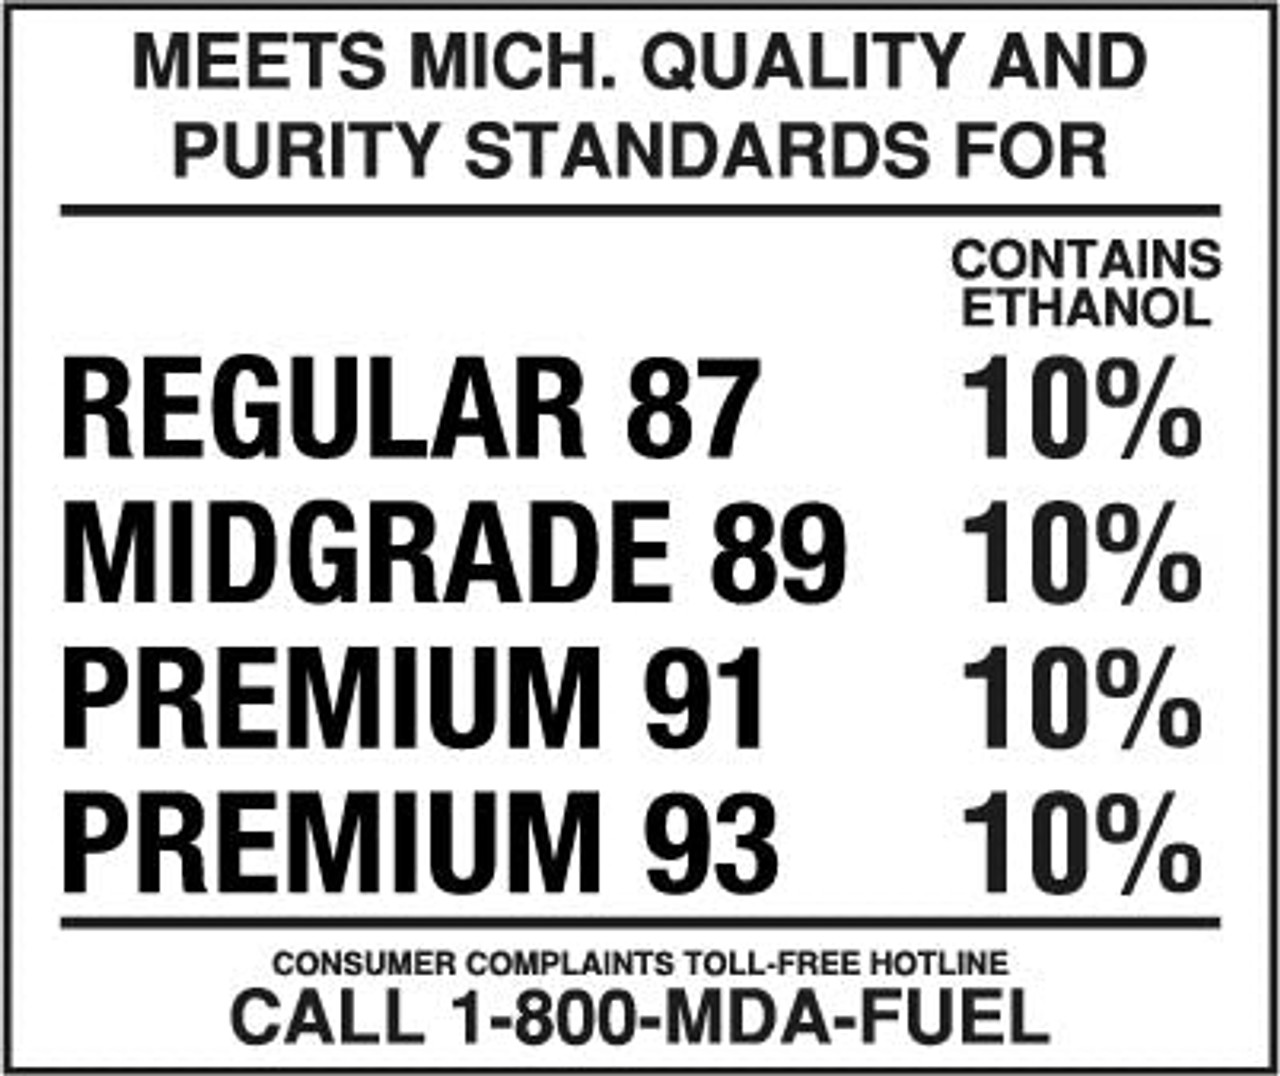 PID-907A - 4.75" x 4" Decal - Michigan 10% Ethanol 4 Product